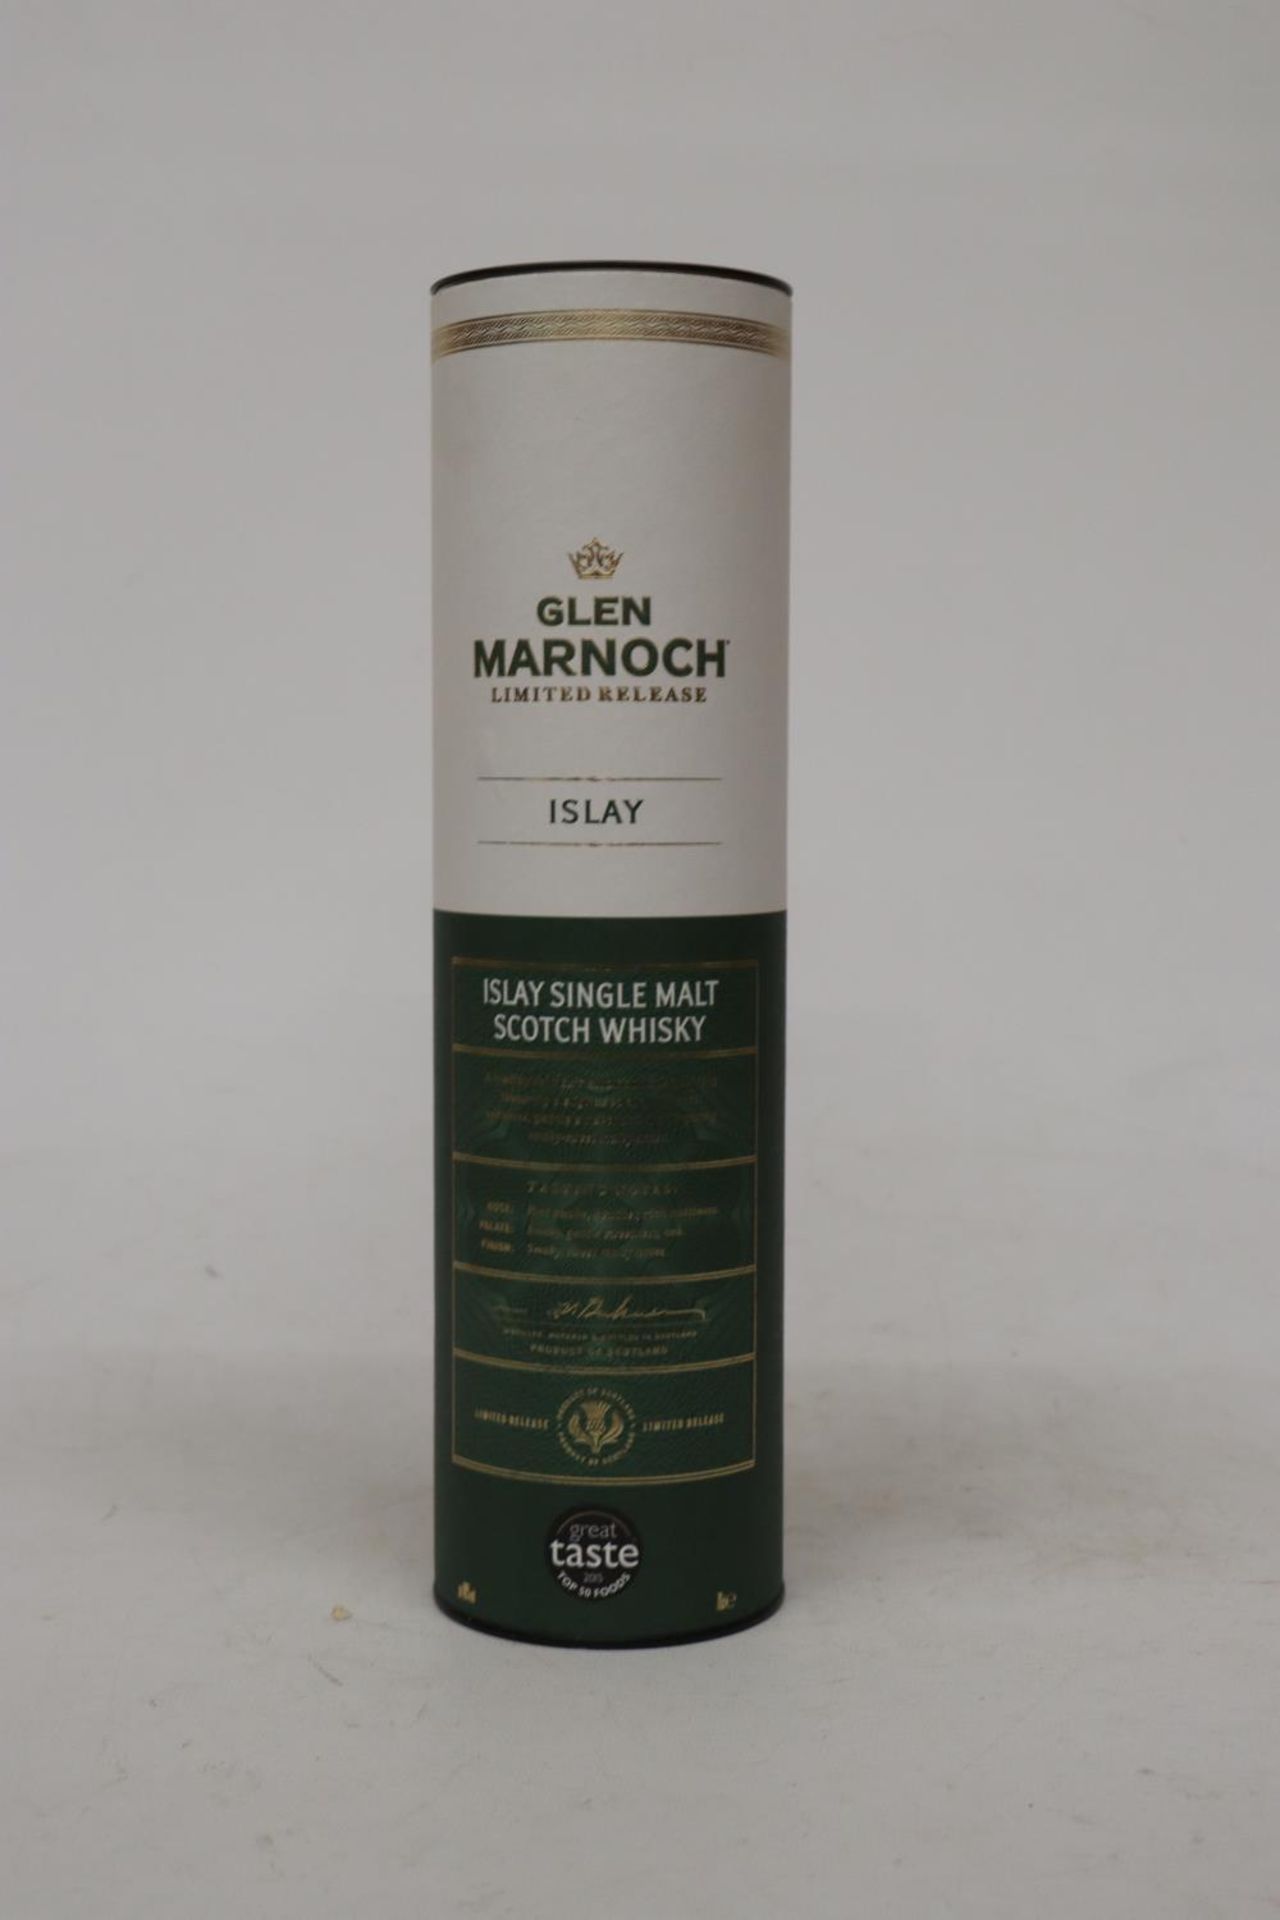 A BOTTLE OF GLENMARNOCH ISLAY LIMITED RELEASE WHISKY, BOXED - Image 3 of 4